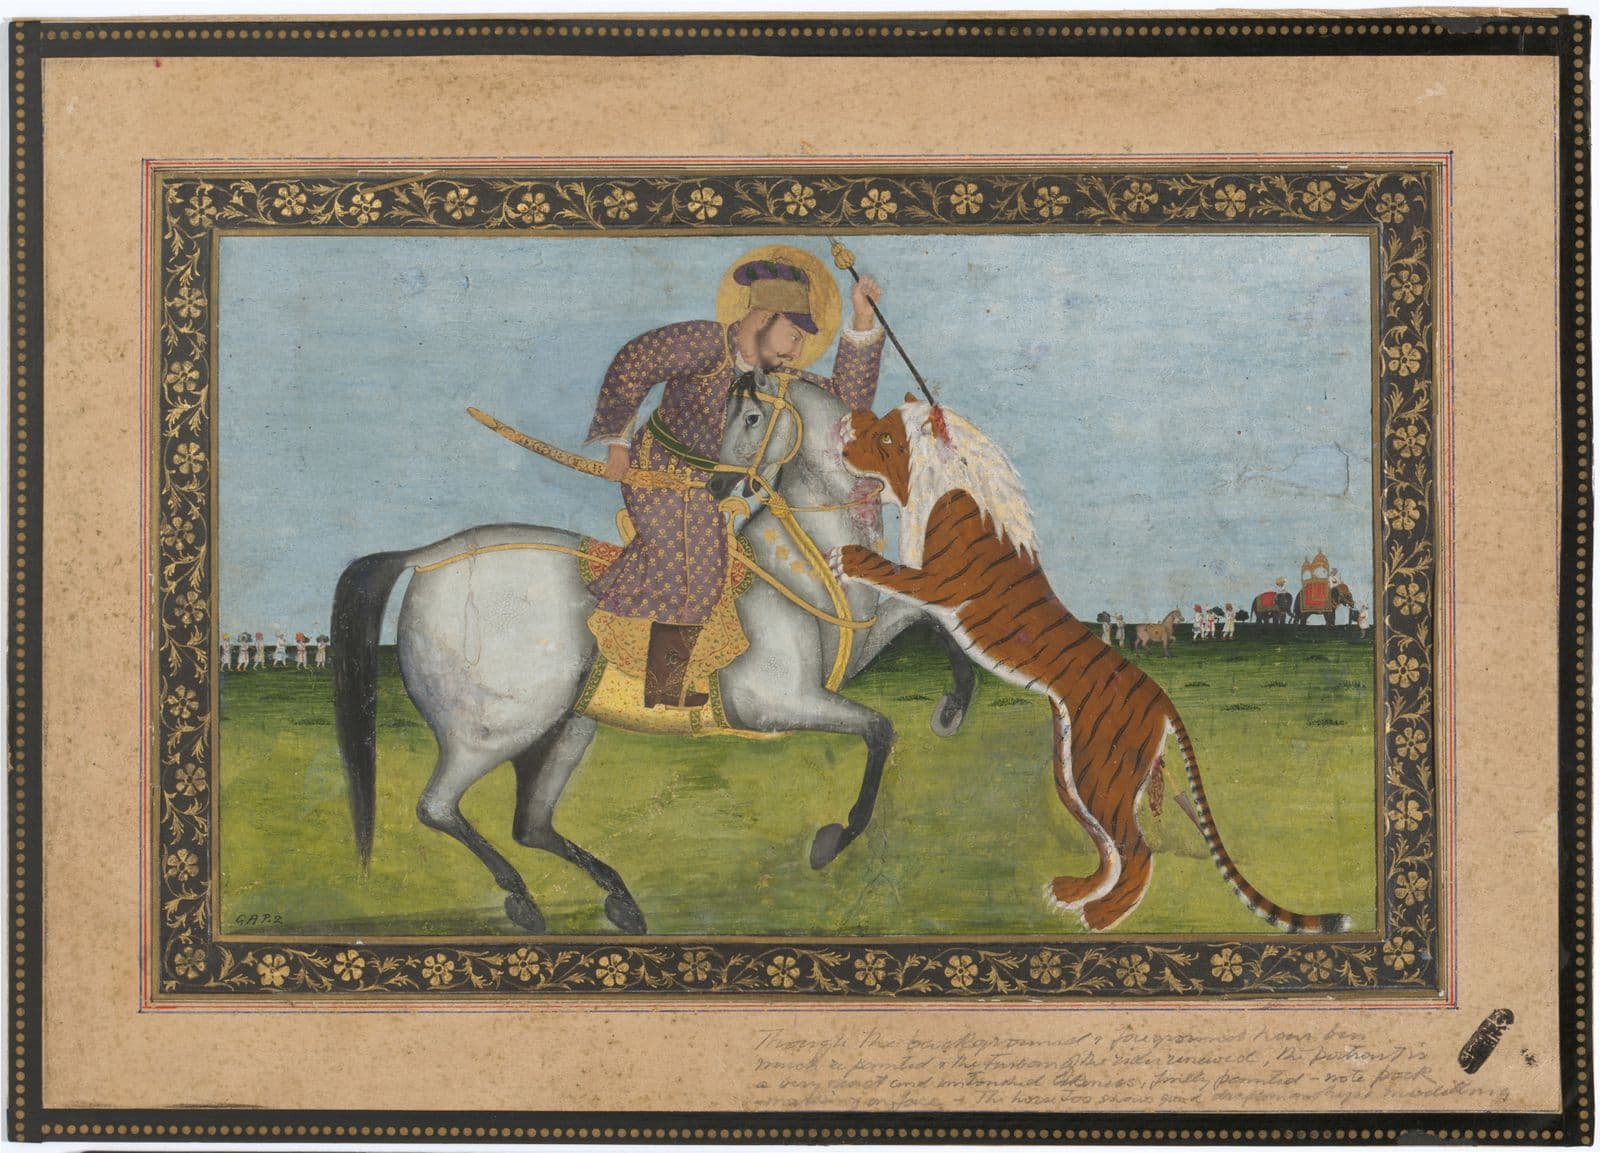 Watercolour painting of a man on a horse fighting a tiger with a spear